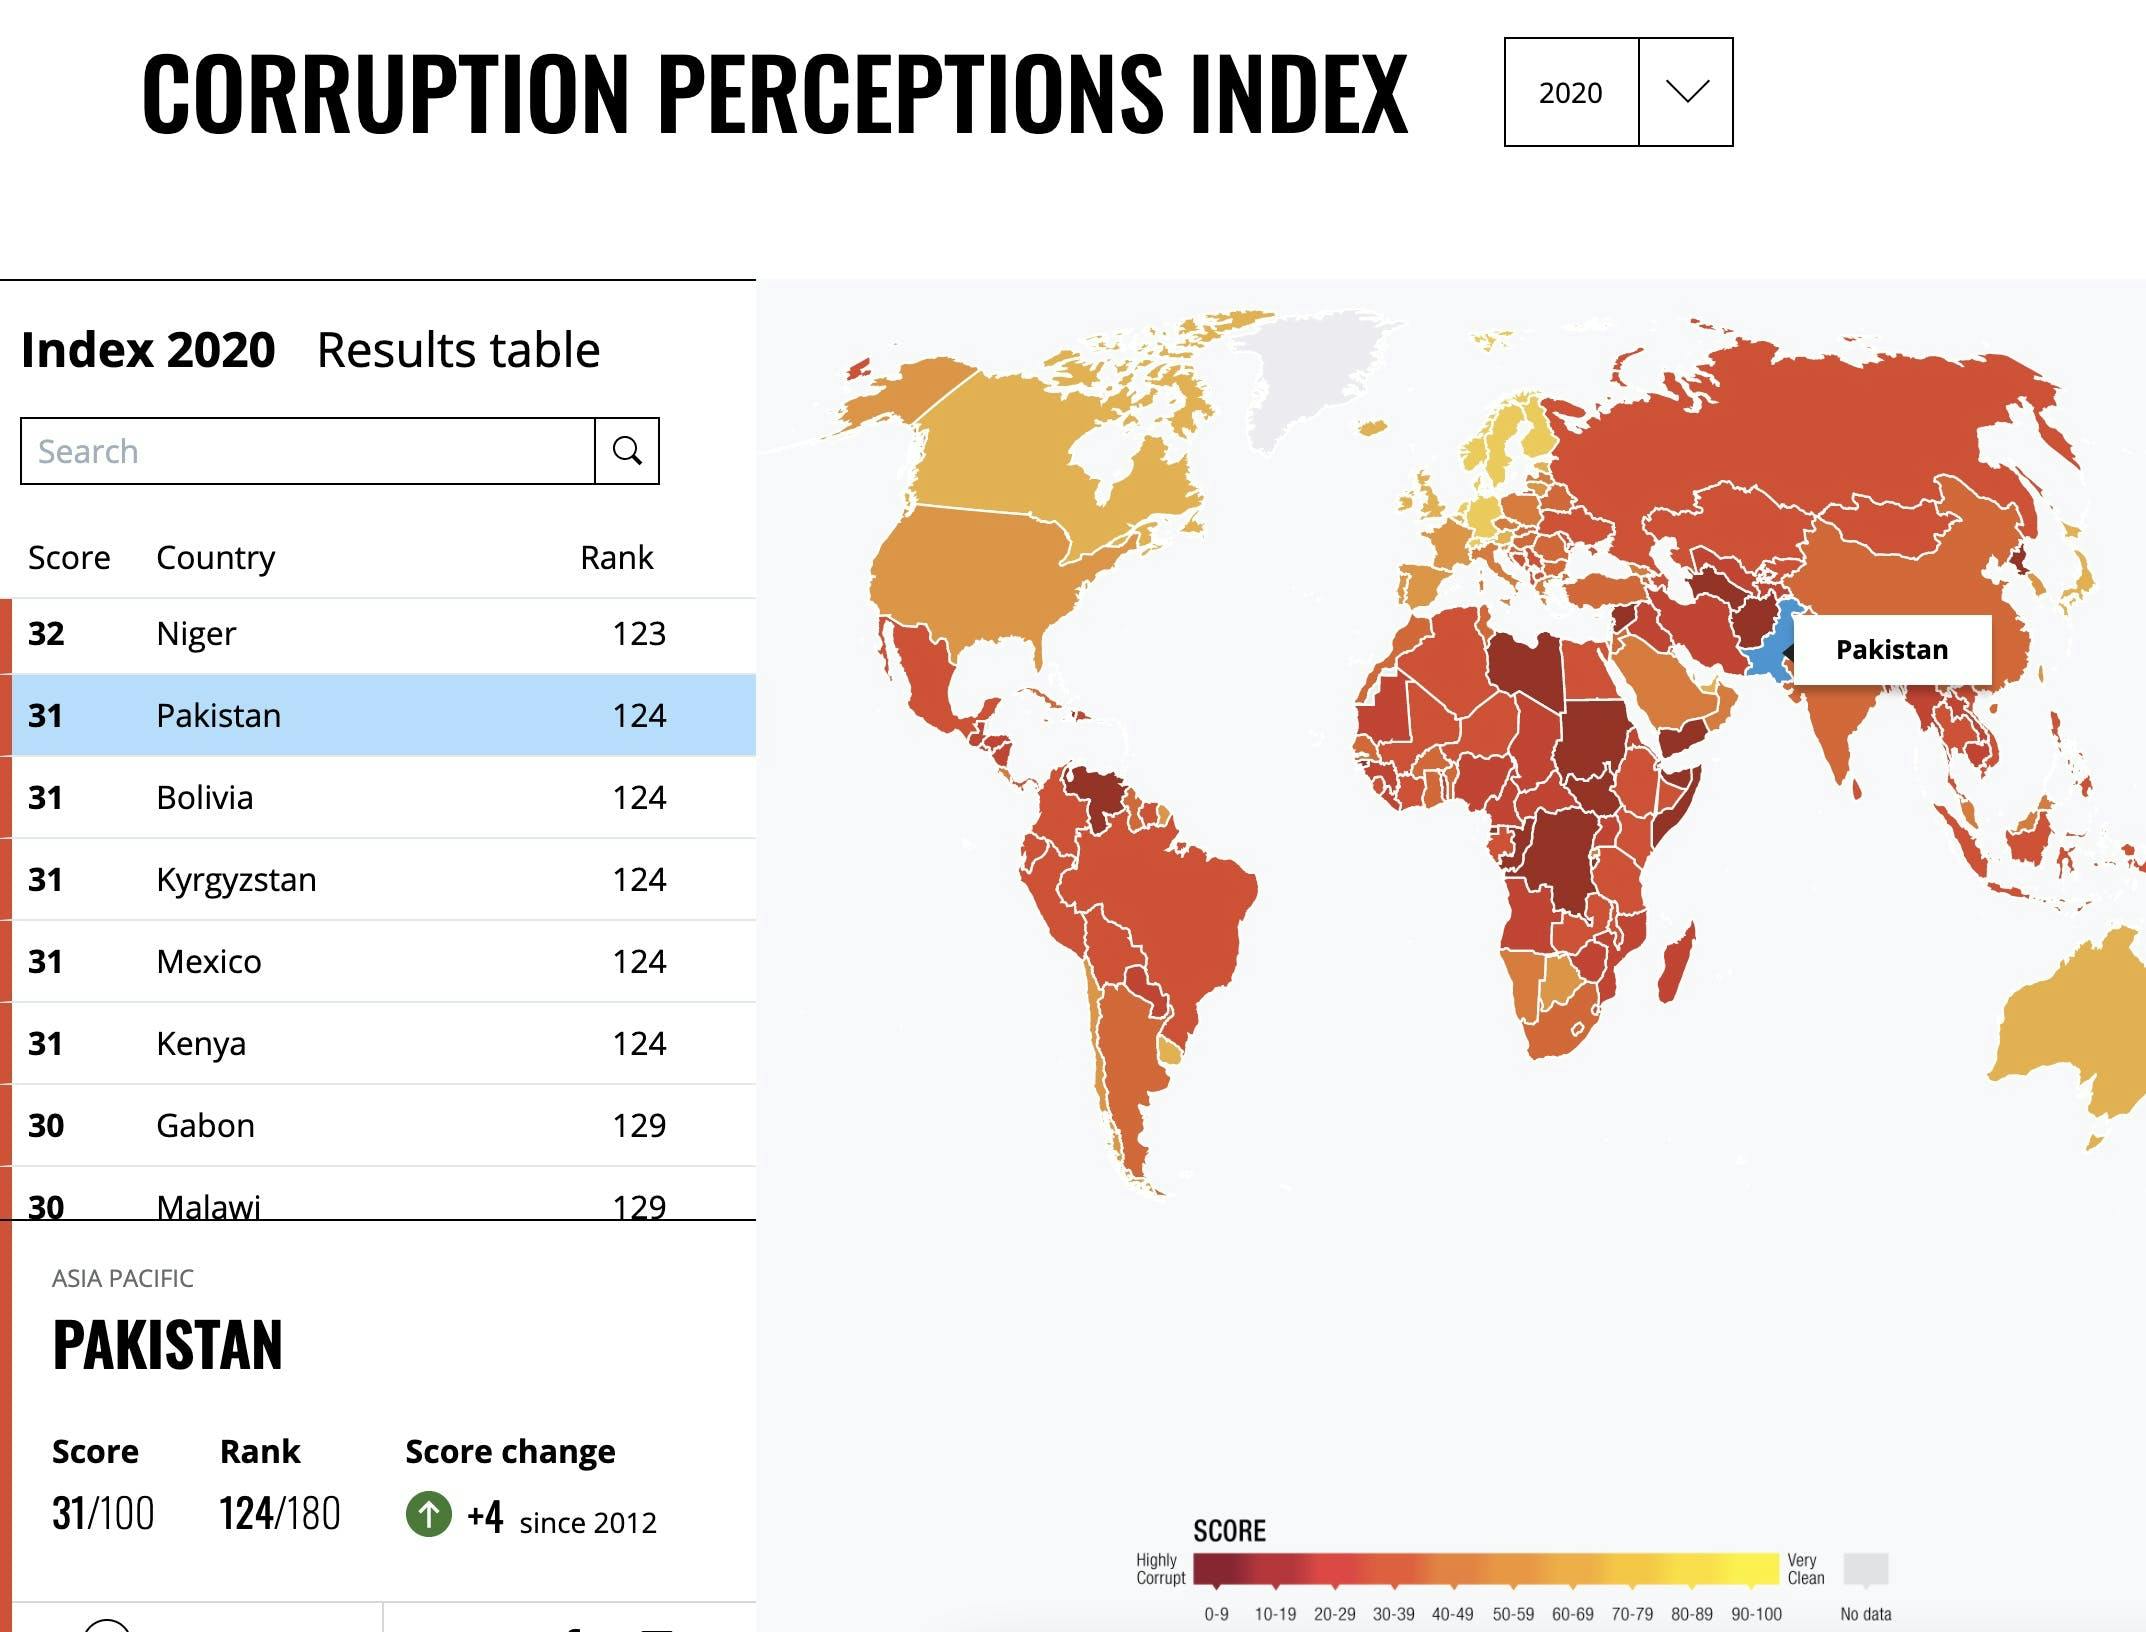 Transparency International ranks Pakistan 124 out of 180 countries - a four-spot loss